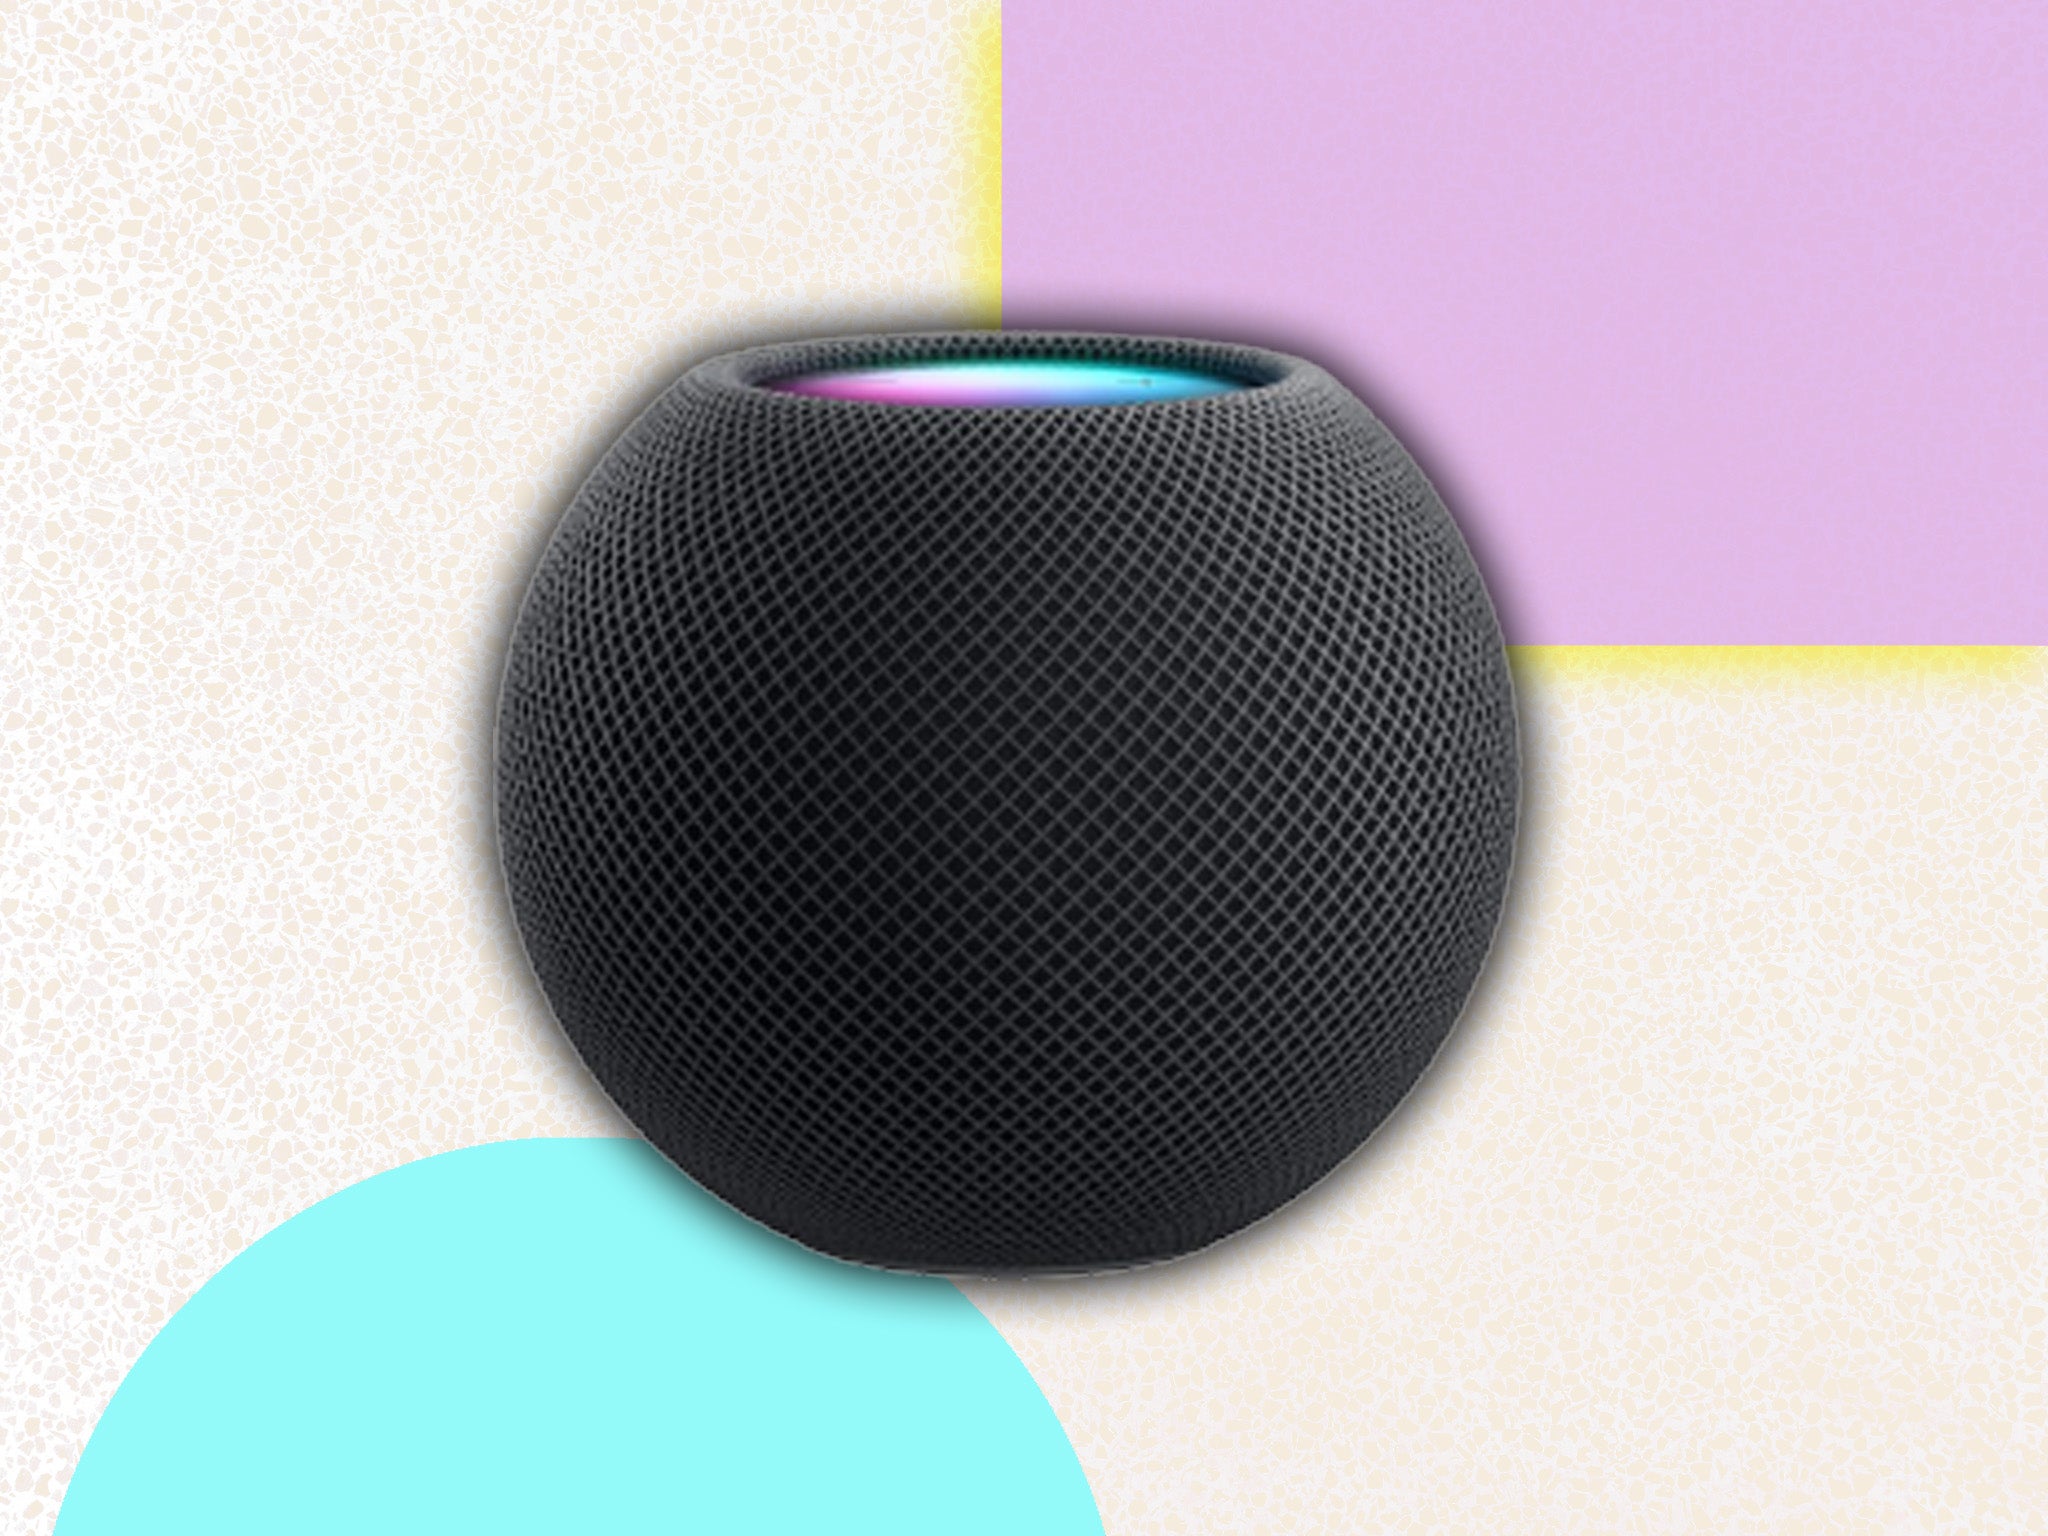 Apple homepod mini review: Is the smart speaker worth your money 